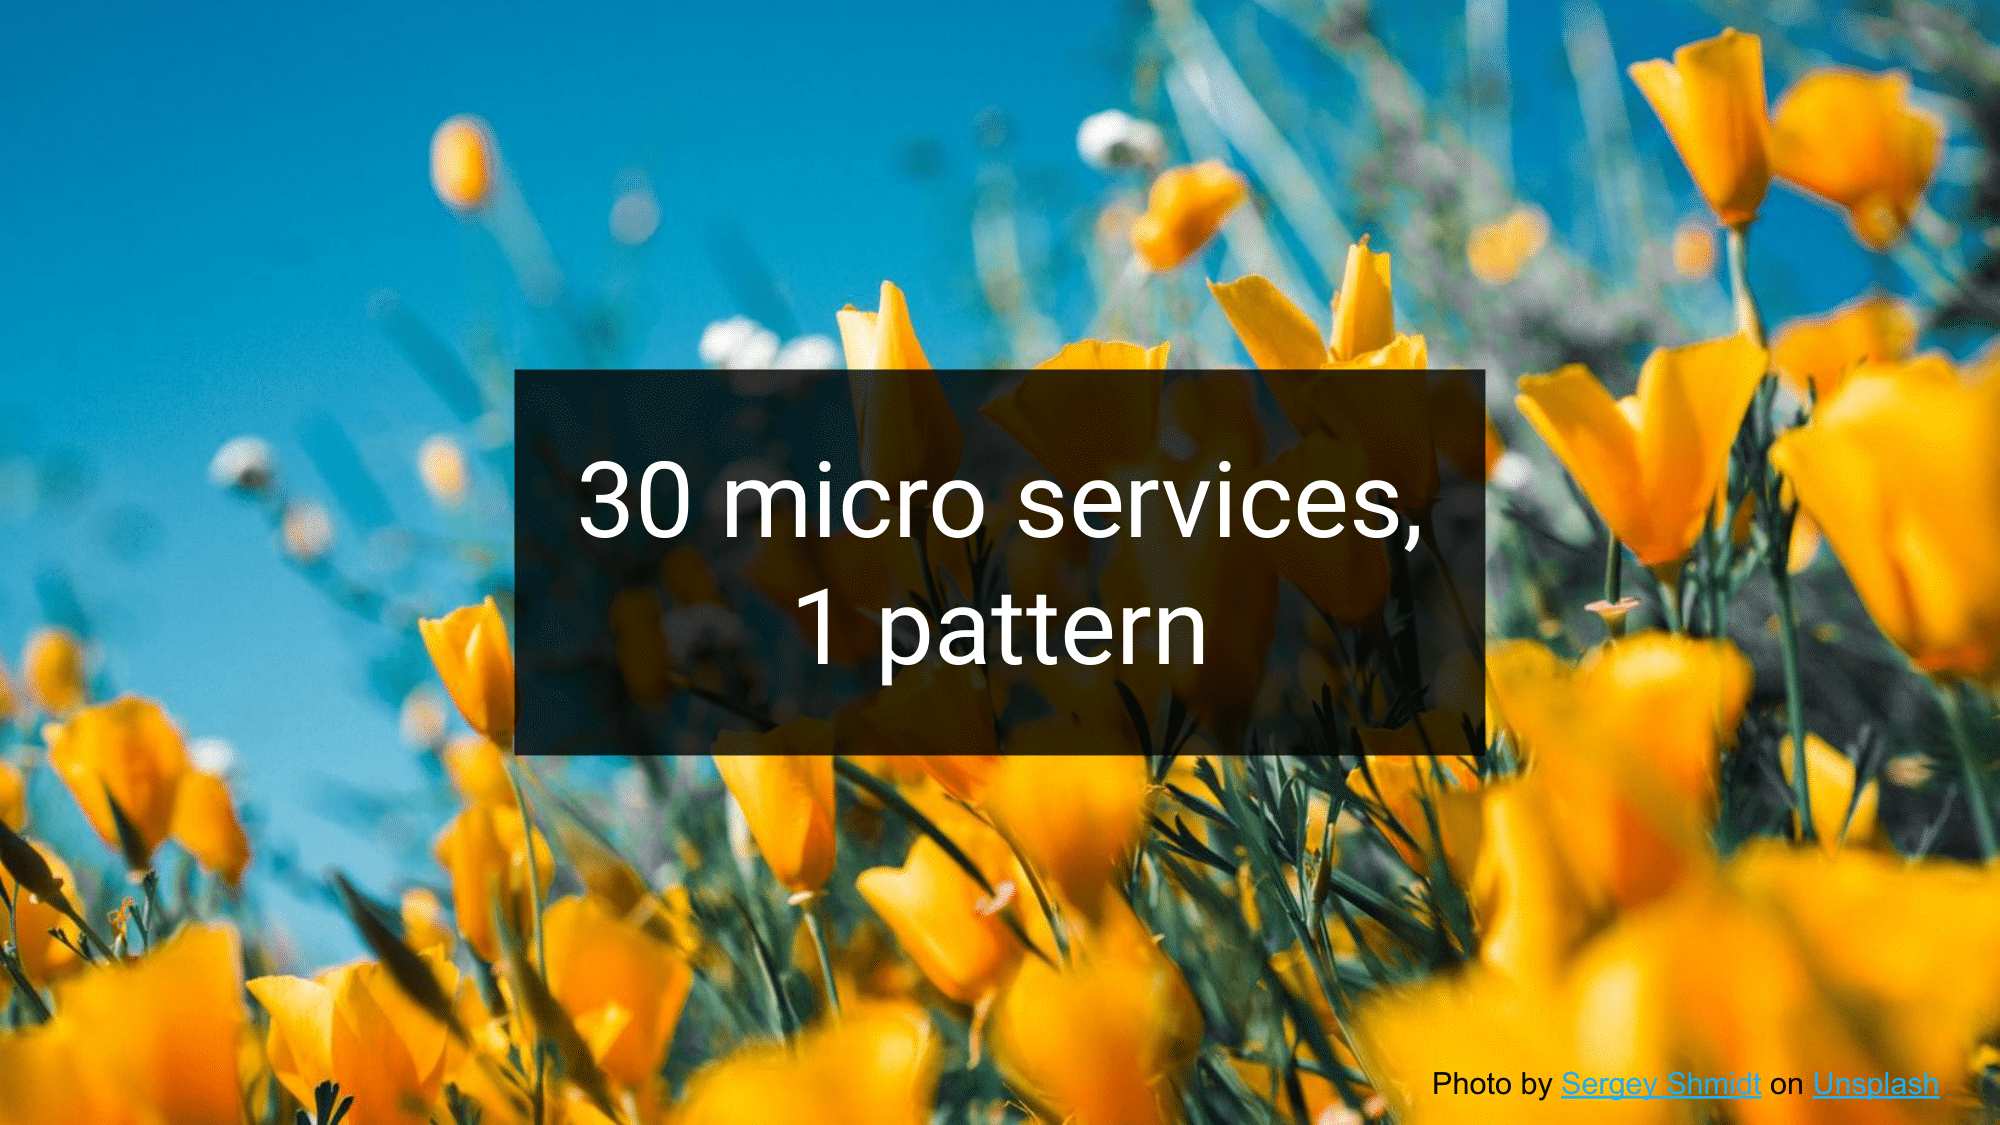 16.-30-microservices-1-pattern